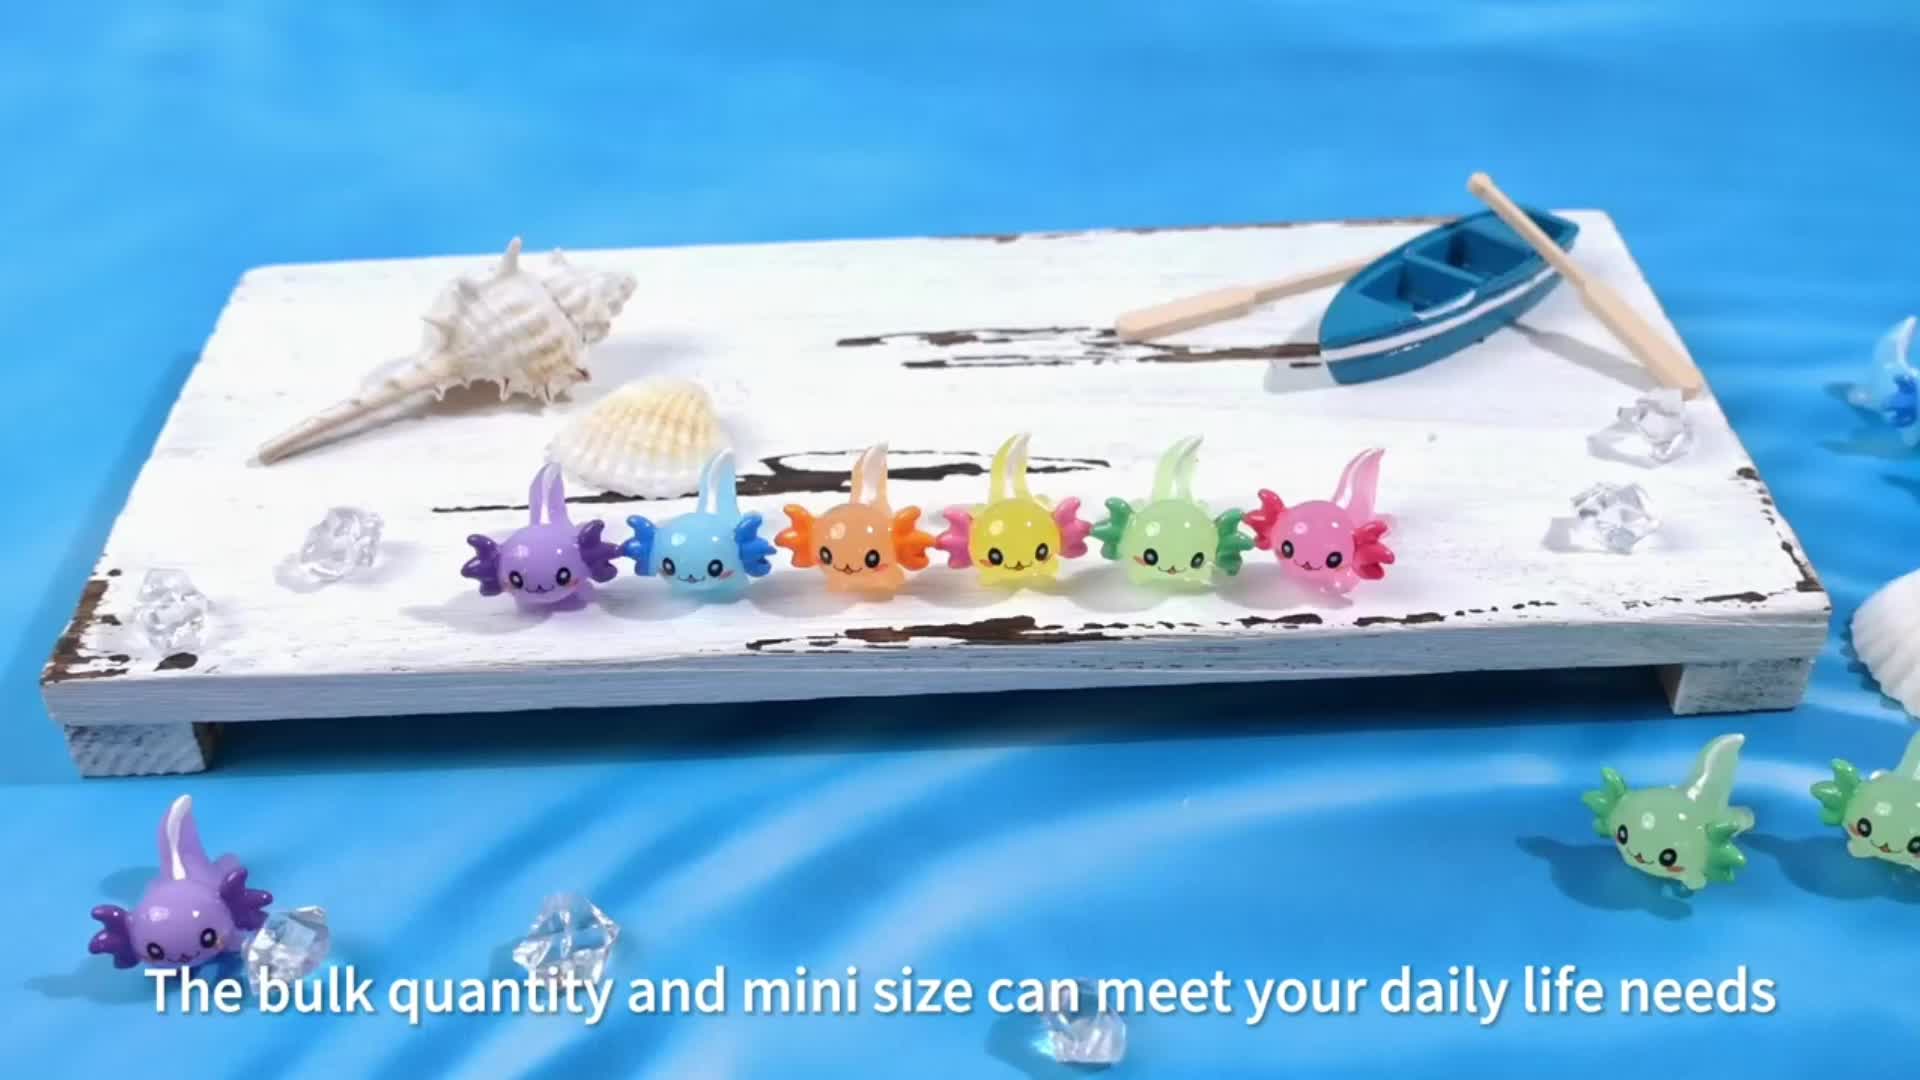 Winyuyby 24 Pcs Animal Charms Axolotl Resin Charms for Jewelry Making Tiny Resin Animals Resin Figures Miniature Axolotl Ornament, Adult Unisex